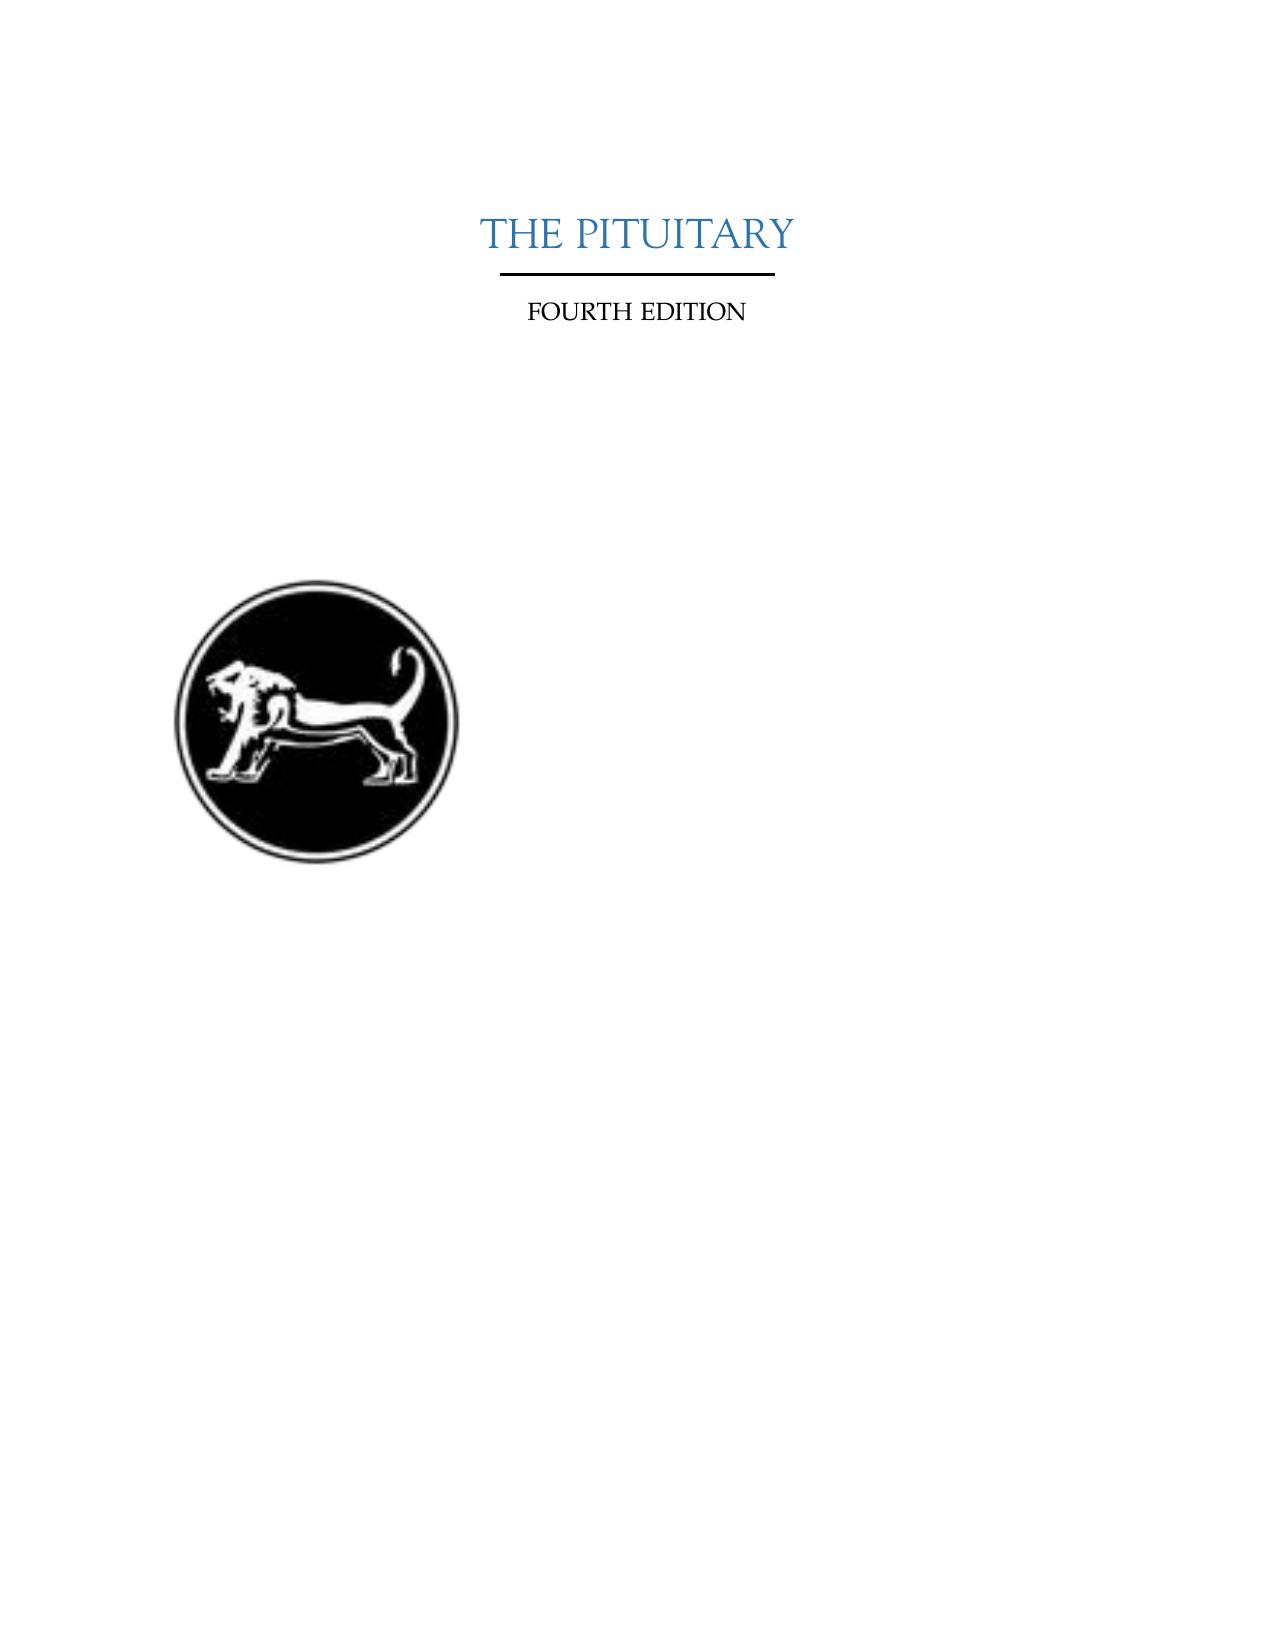 THE PITUITARY